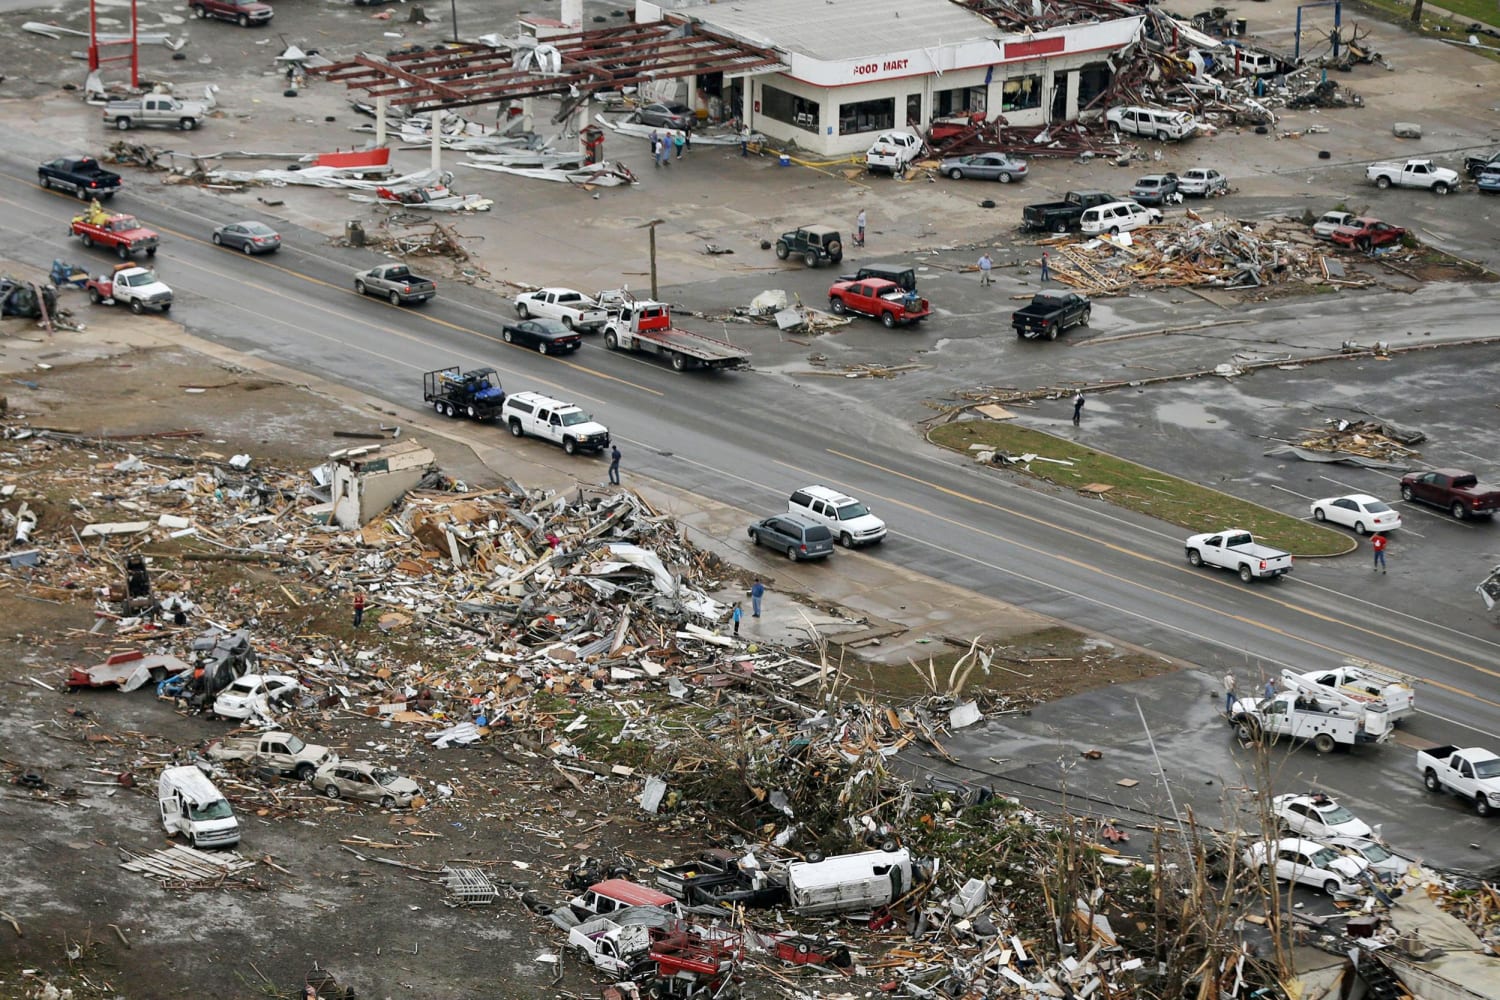 Vilonia, Ark., Looks 'Like It Has Been Hit With an Atomic Bomb' - NBC News2500 x 1667